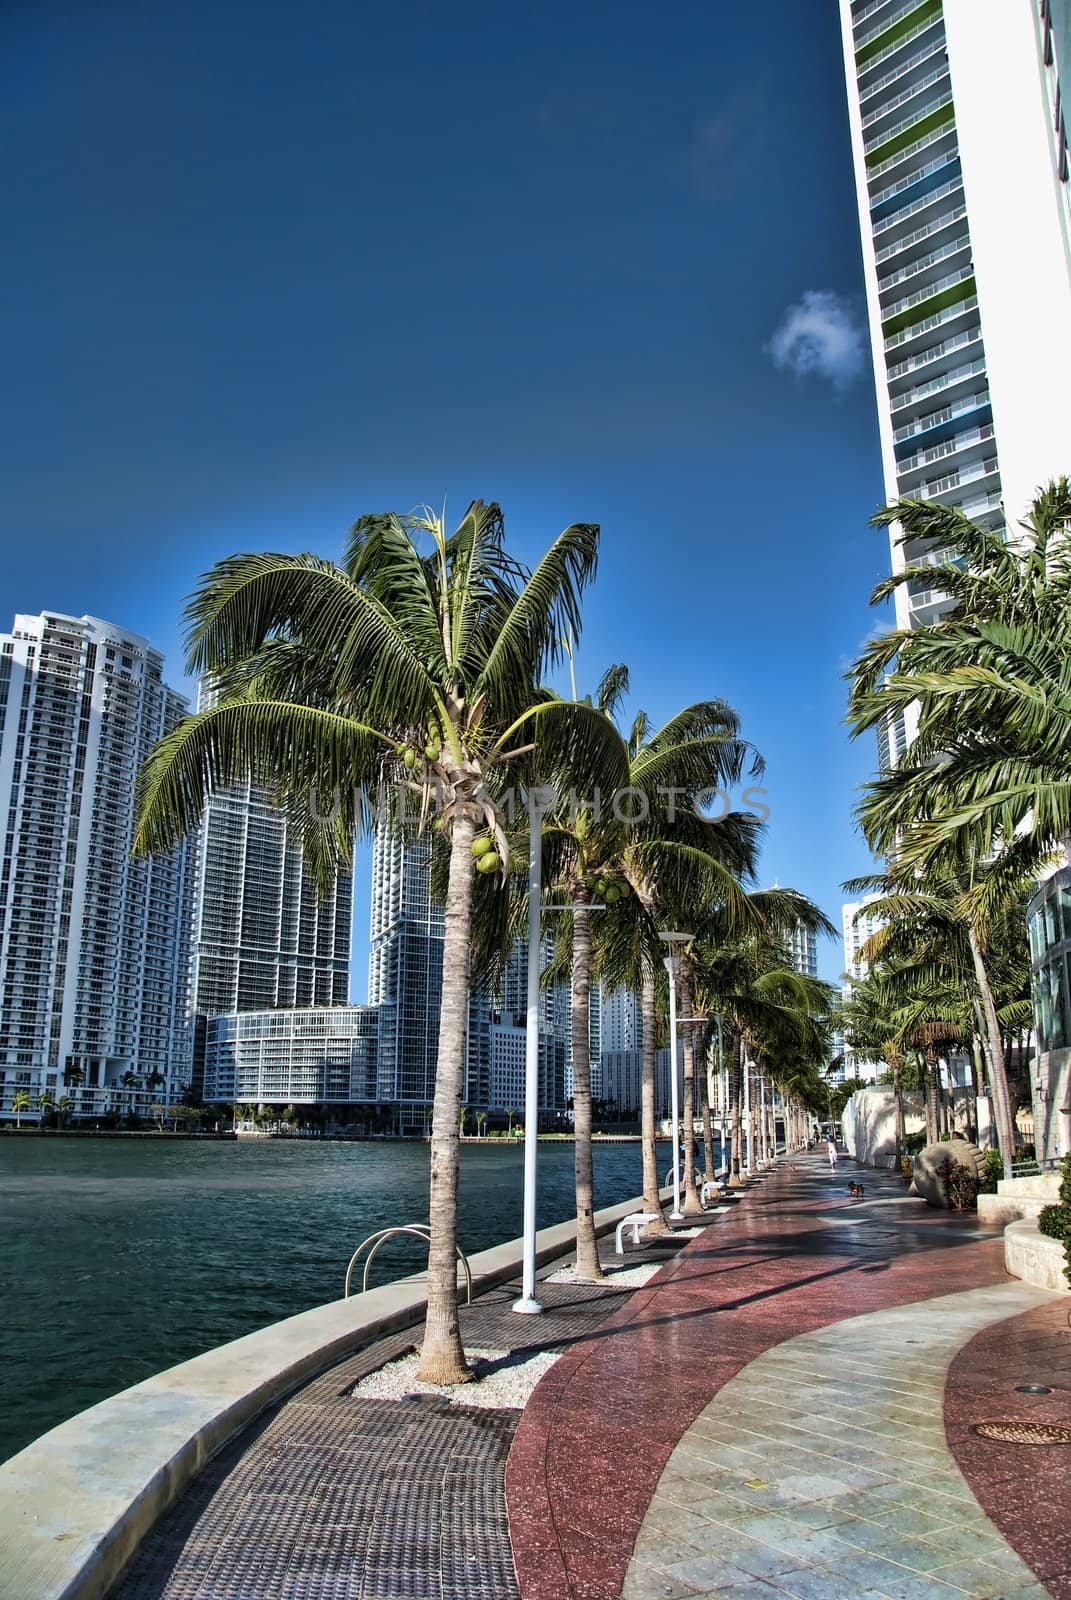 Miami, Florida, on a Hot and Sunny Spring Morning by jovannig